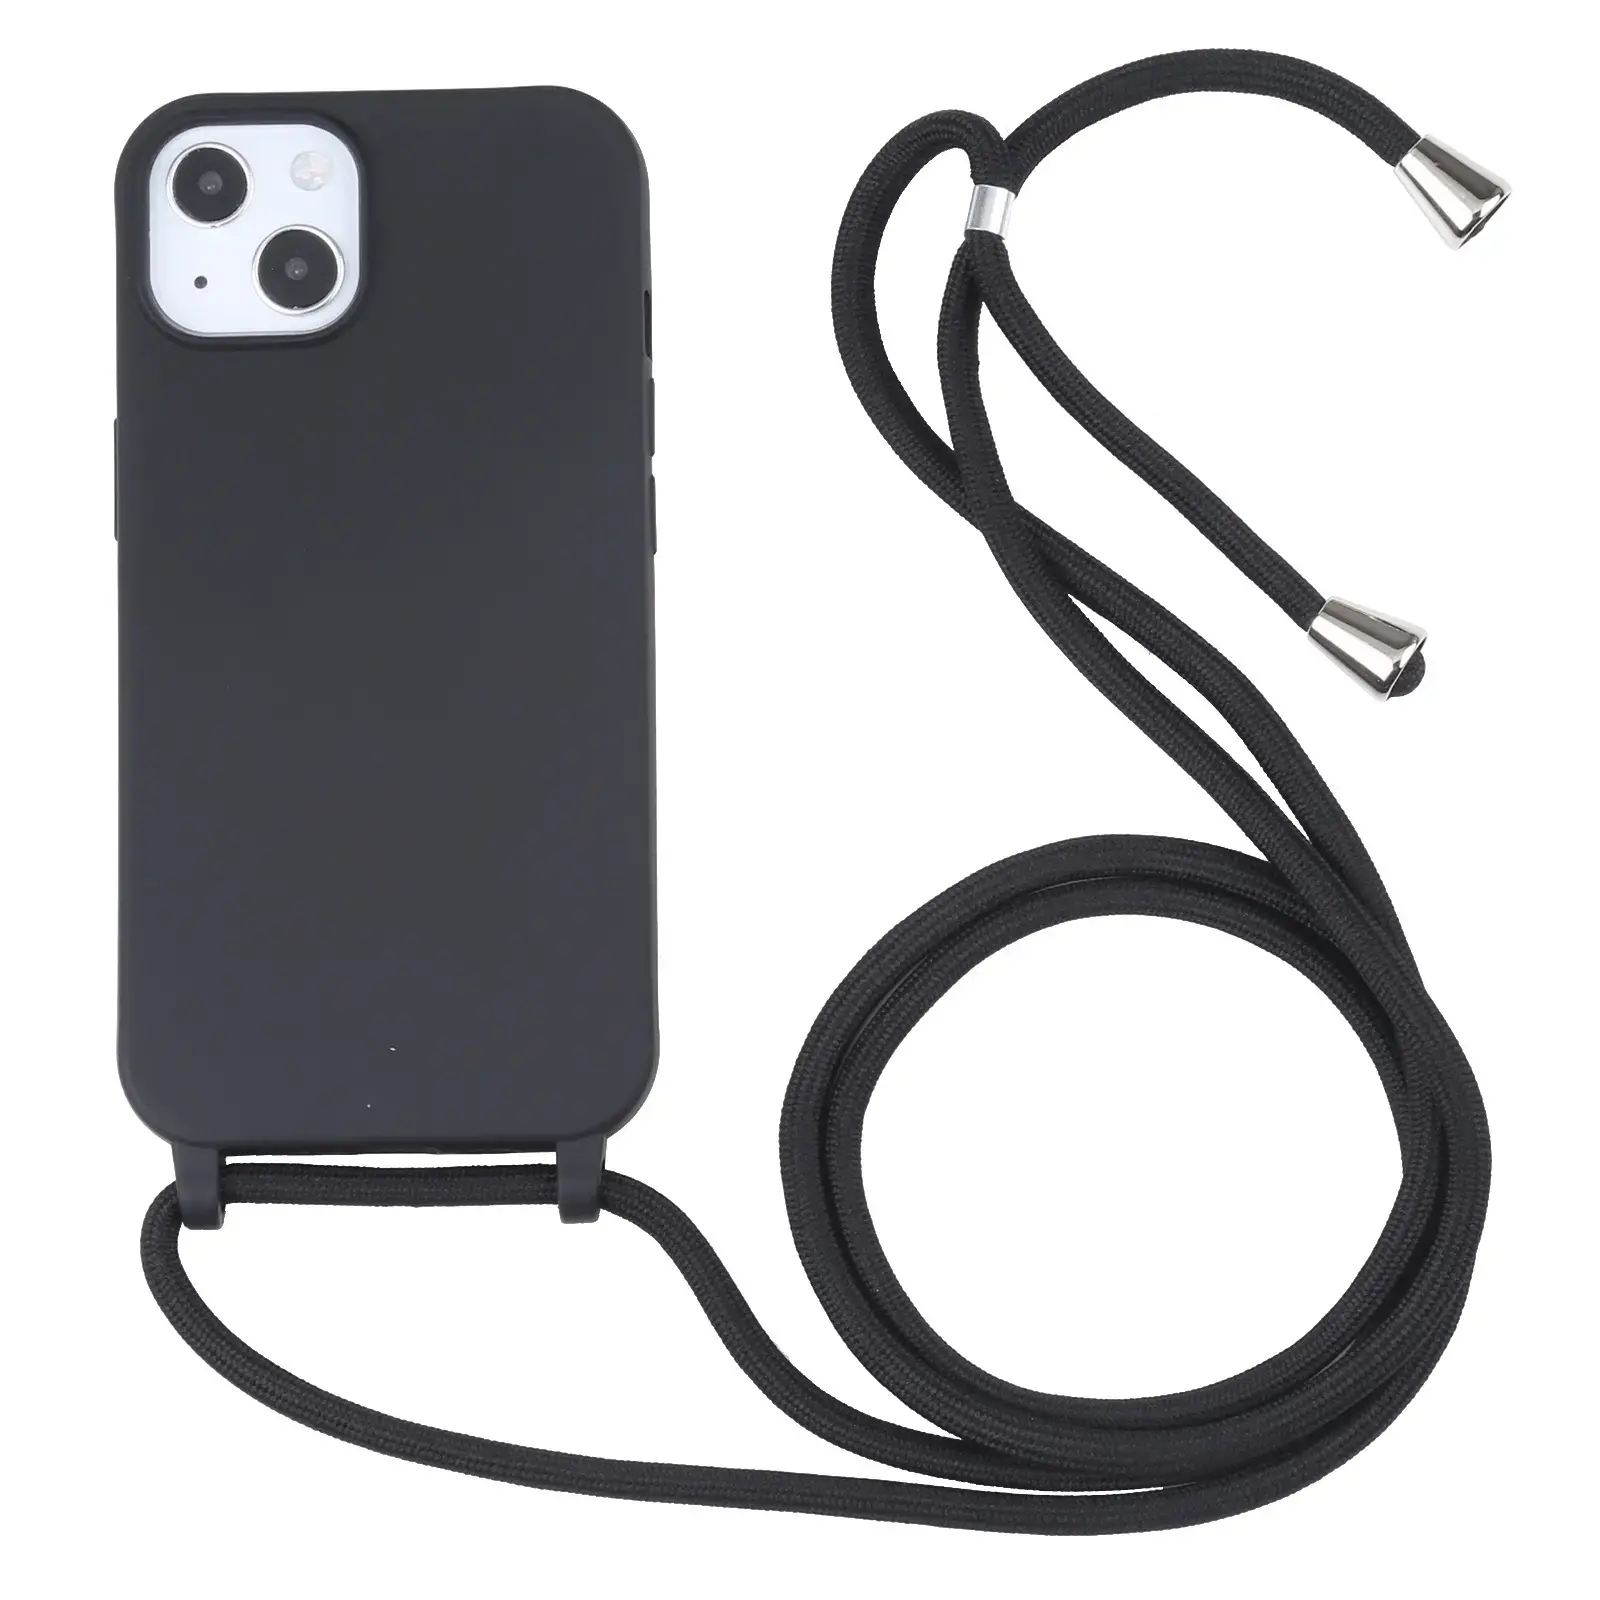 Lanyard Silicone Case Black English Graphic Phone Case With